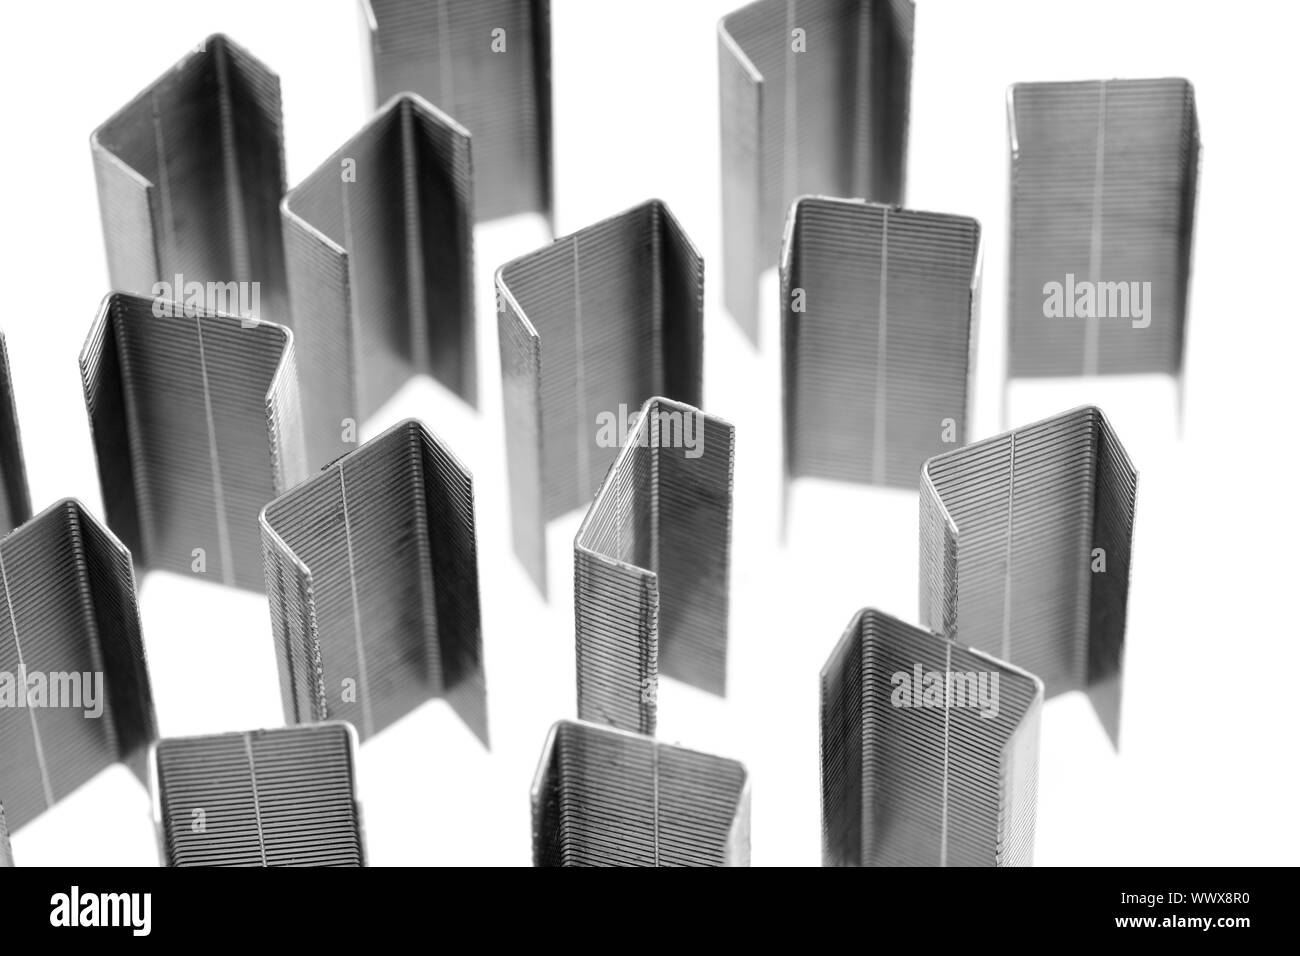 Black and white image of staples on white background Stock Photo